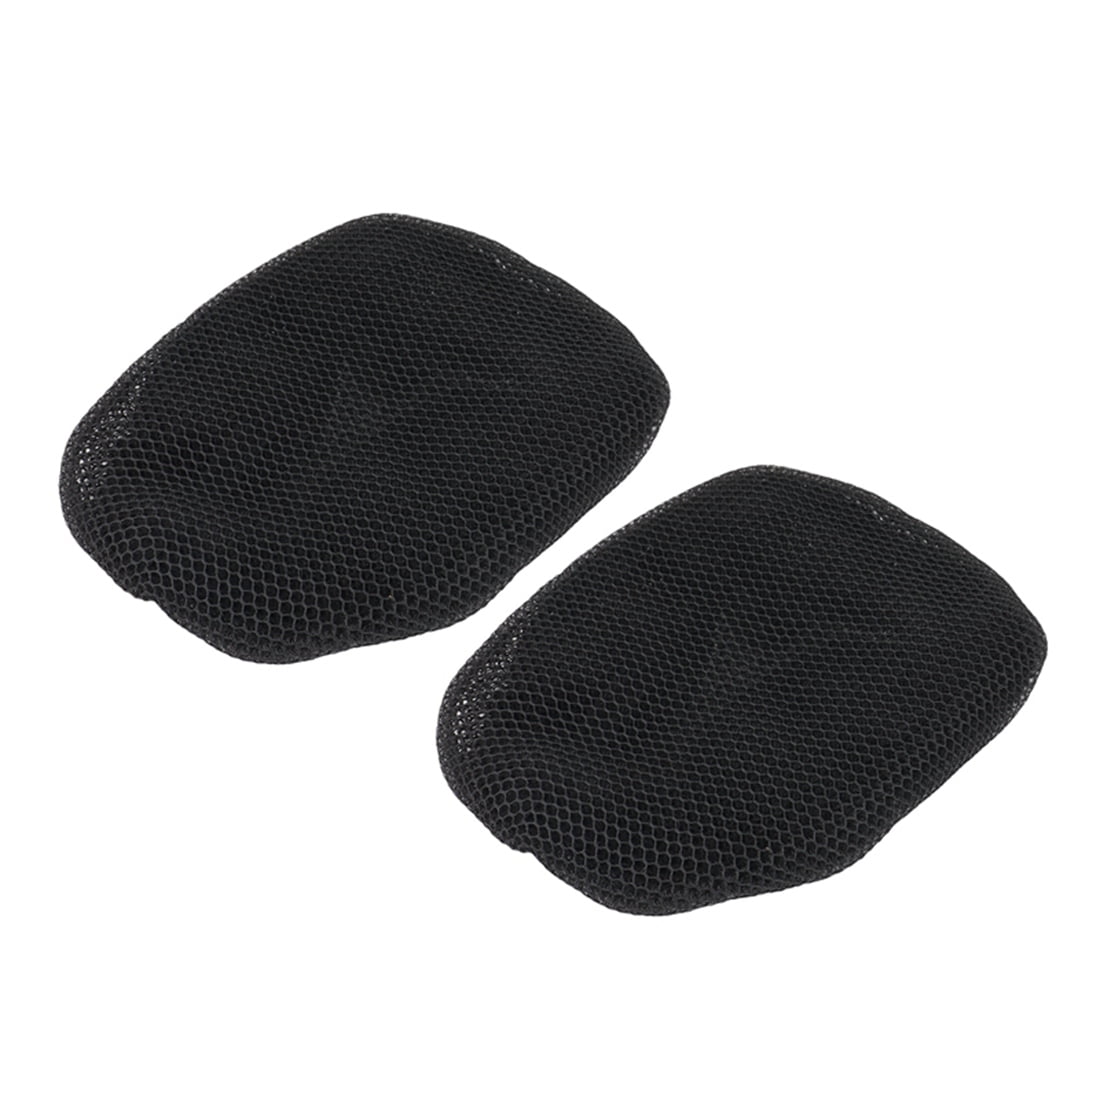 WELPET Motorcycle Anti-Slip 3D Mesh Fabric Seat Cover Breathable ...